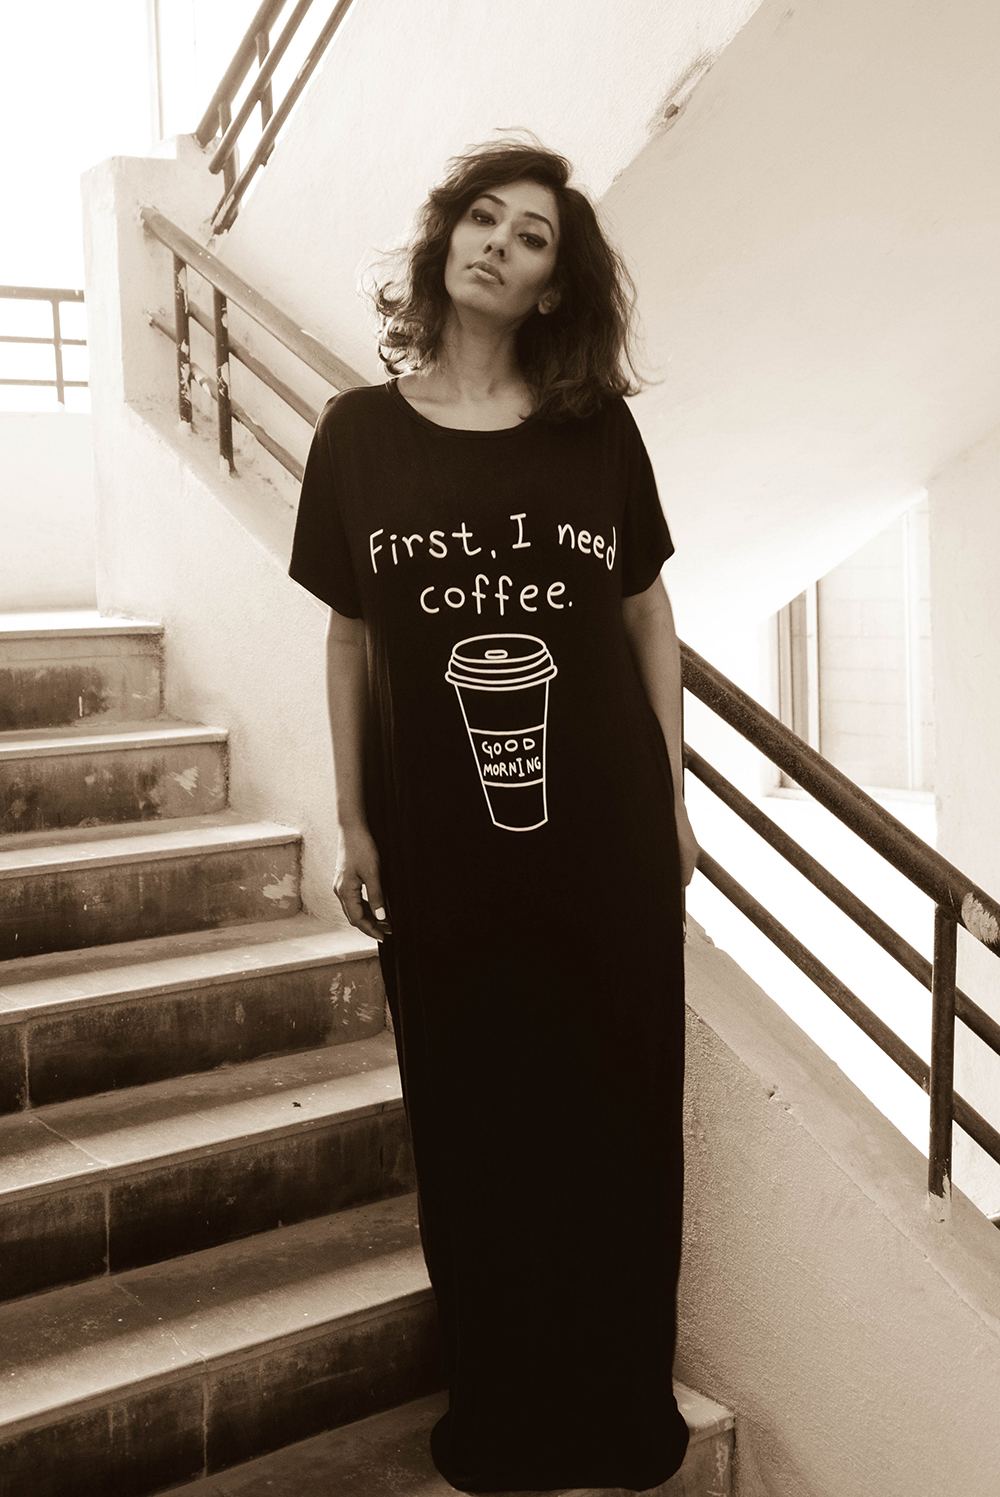  Lookbook ; Black Maxi ; Shein ; Morning Coffee ; Black ; Dress ; Comfy ; Maxi ; Loungewear ; Outfit ; fashion photography ; Messy hair ; Sunday outfit ; summer fashion ; summer outfit ; spring ; summer 17 ; boho look ; Naznin ; Naznin Suhaer ; dusky; model ; indian blogger ; hyderabad fashion bloggers ; hyderabad bloggers ; hyderabad fashion blogger ; I Dress for the Applause ; 